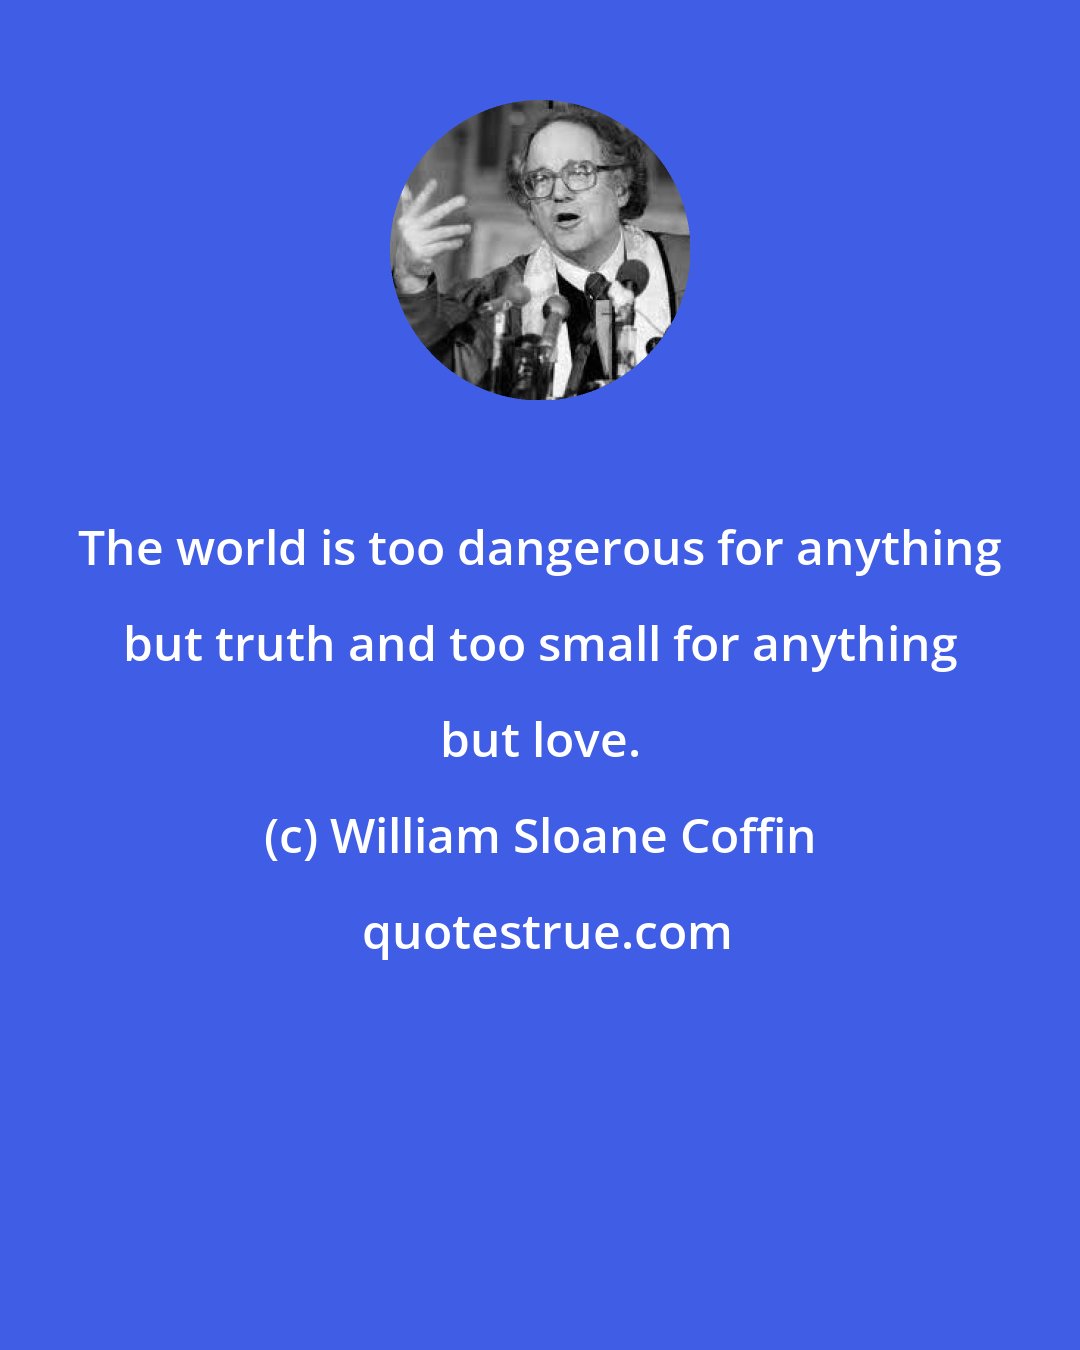 William Sloane Coffin: The world is too dangerous for anything but truth and too small for anything but love.